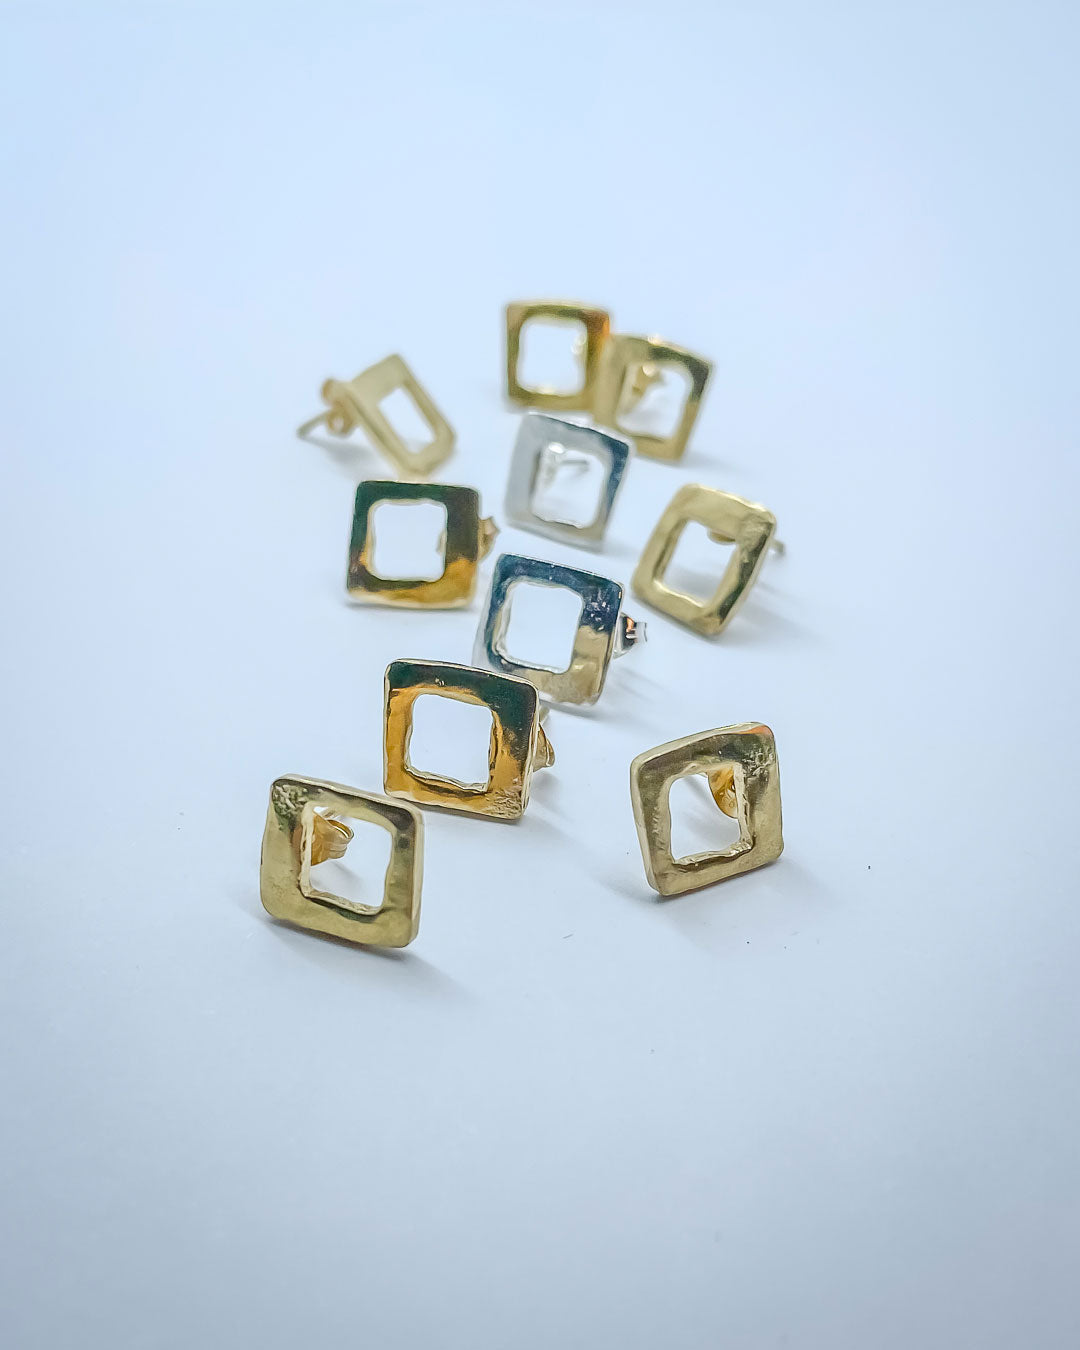 A scattering of Gold and Silver open geometric form pierced earrings inspired by Mid Century Geometric Patterns. Deliberately left to show makers marks.